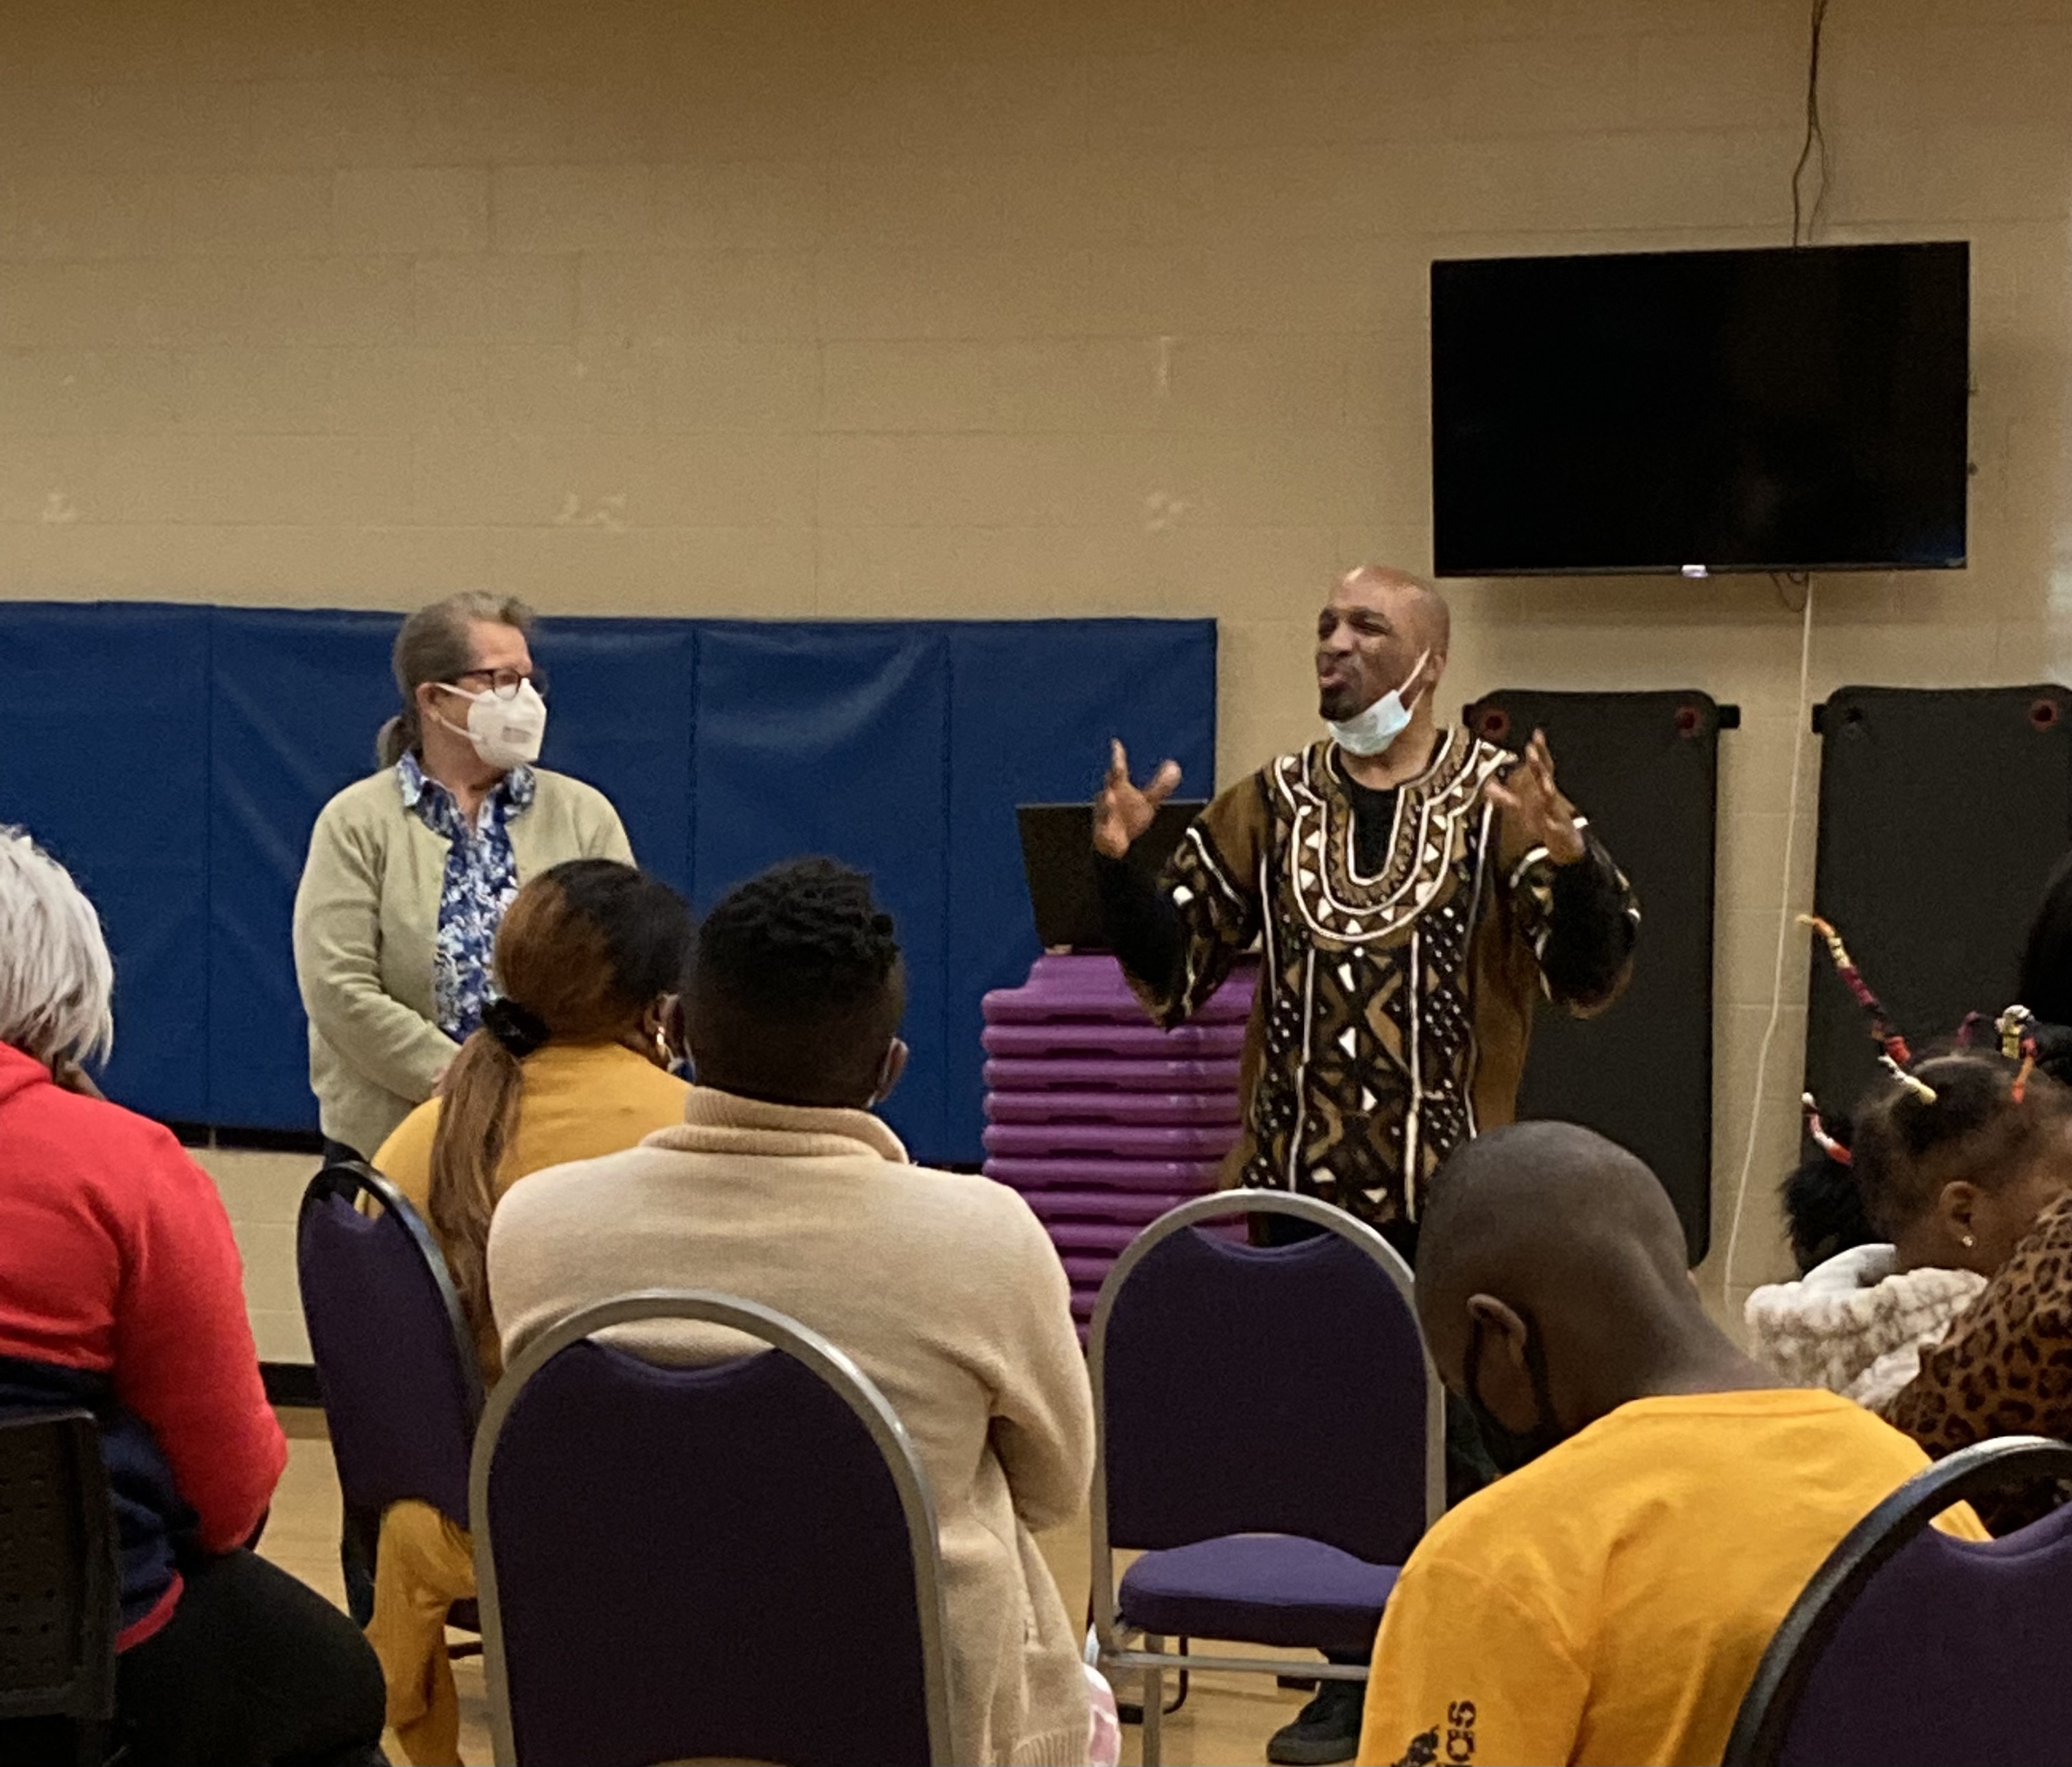 A Black man speaks to an audience in a community setting